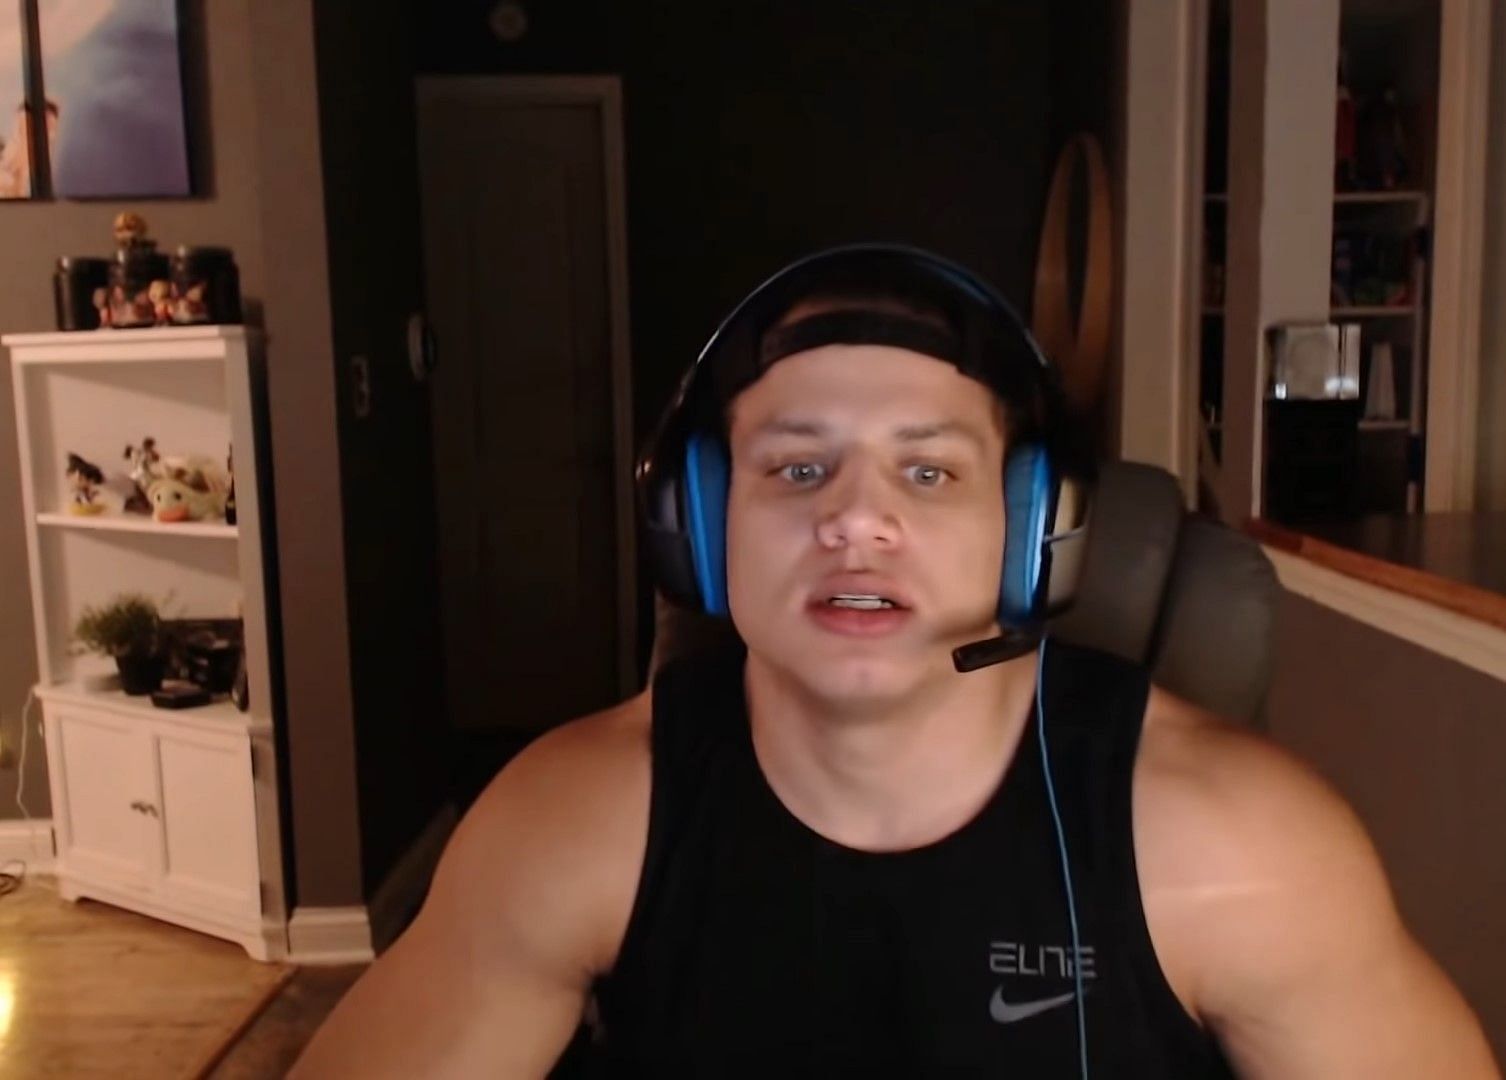 Tyler1 received harsh comments from a fan after refusing to play with him. (Image via Twitch/loltyler1)